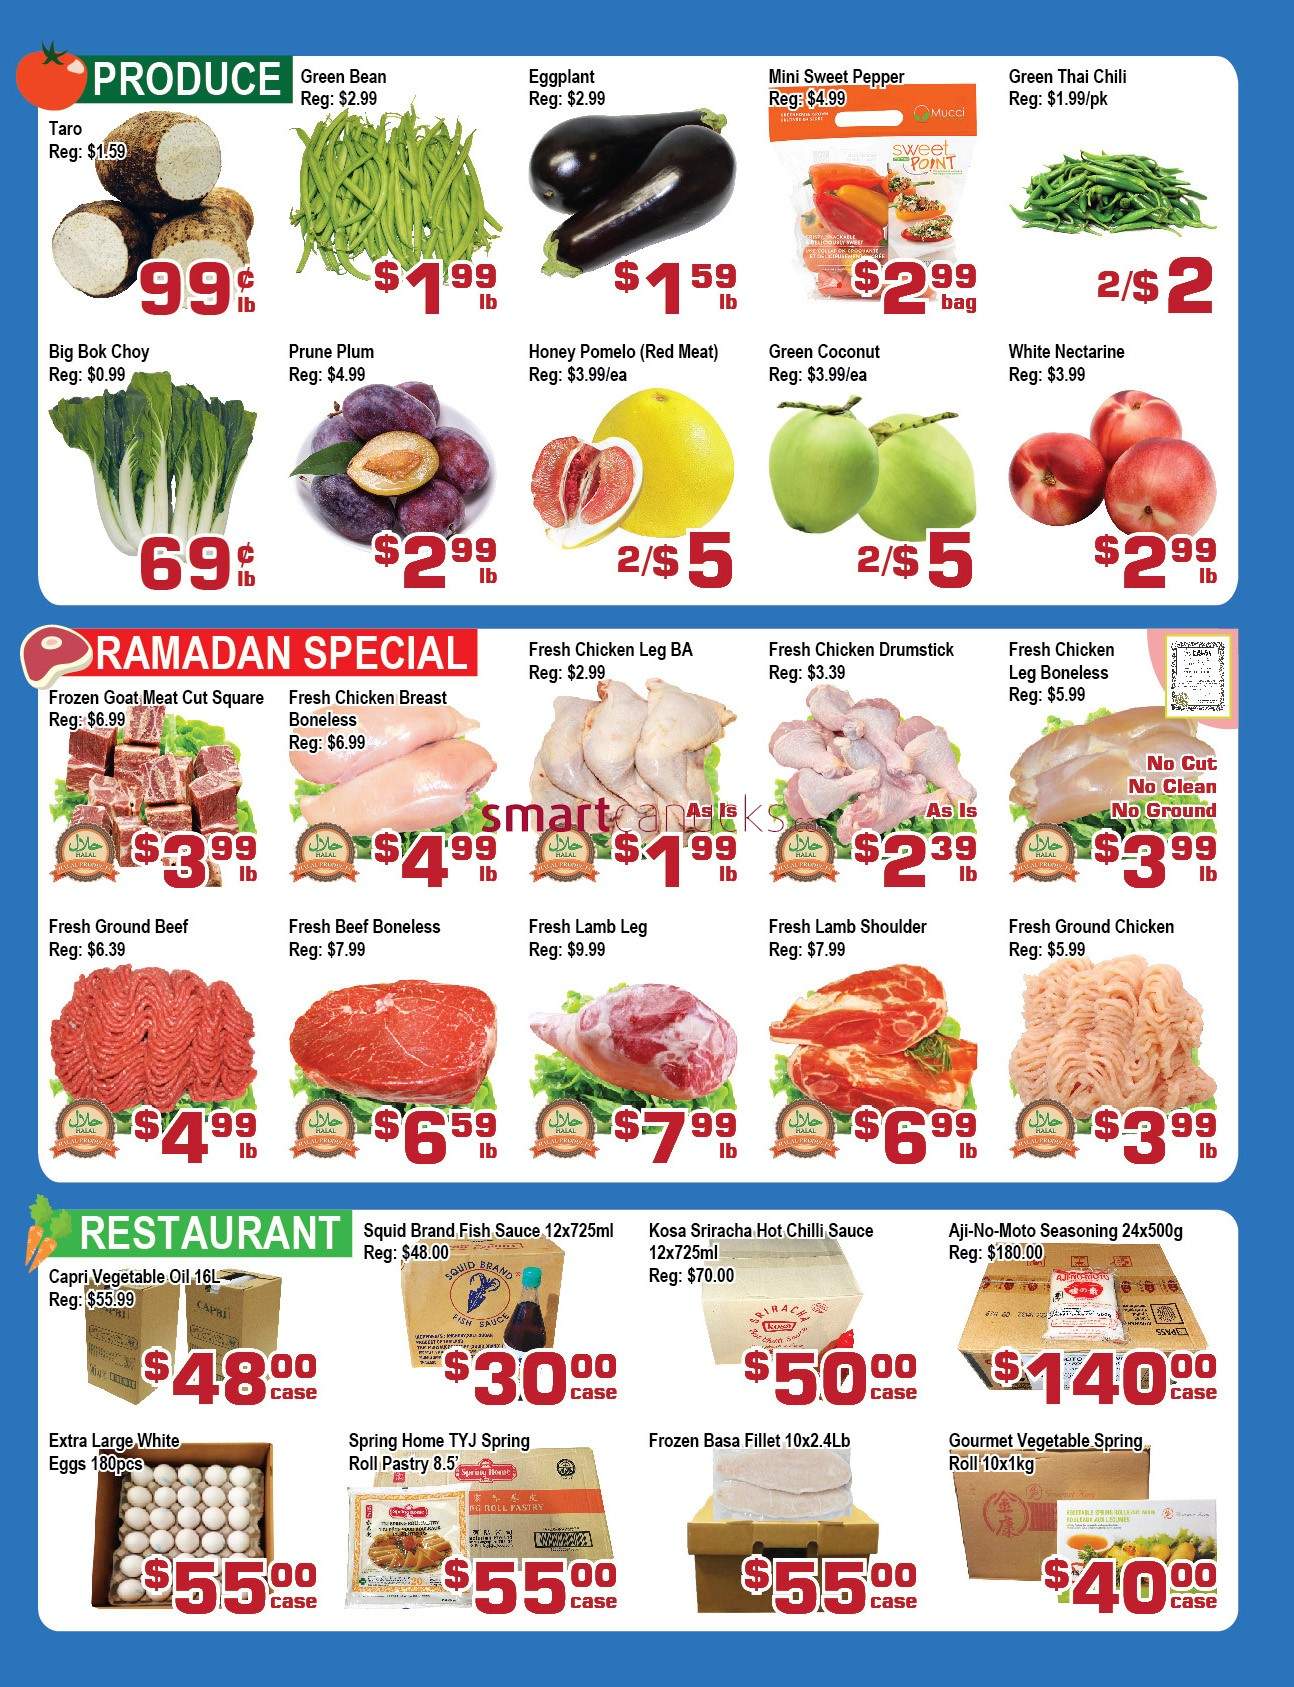 Top Food Supermarket Flyer March 15 to 21